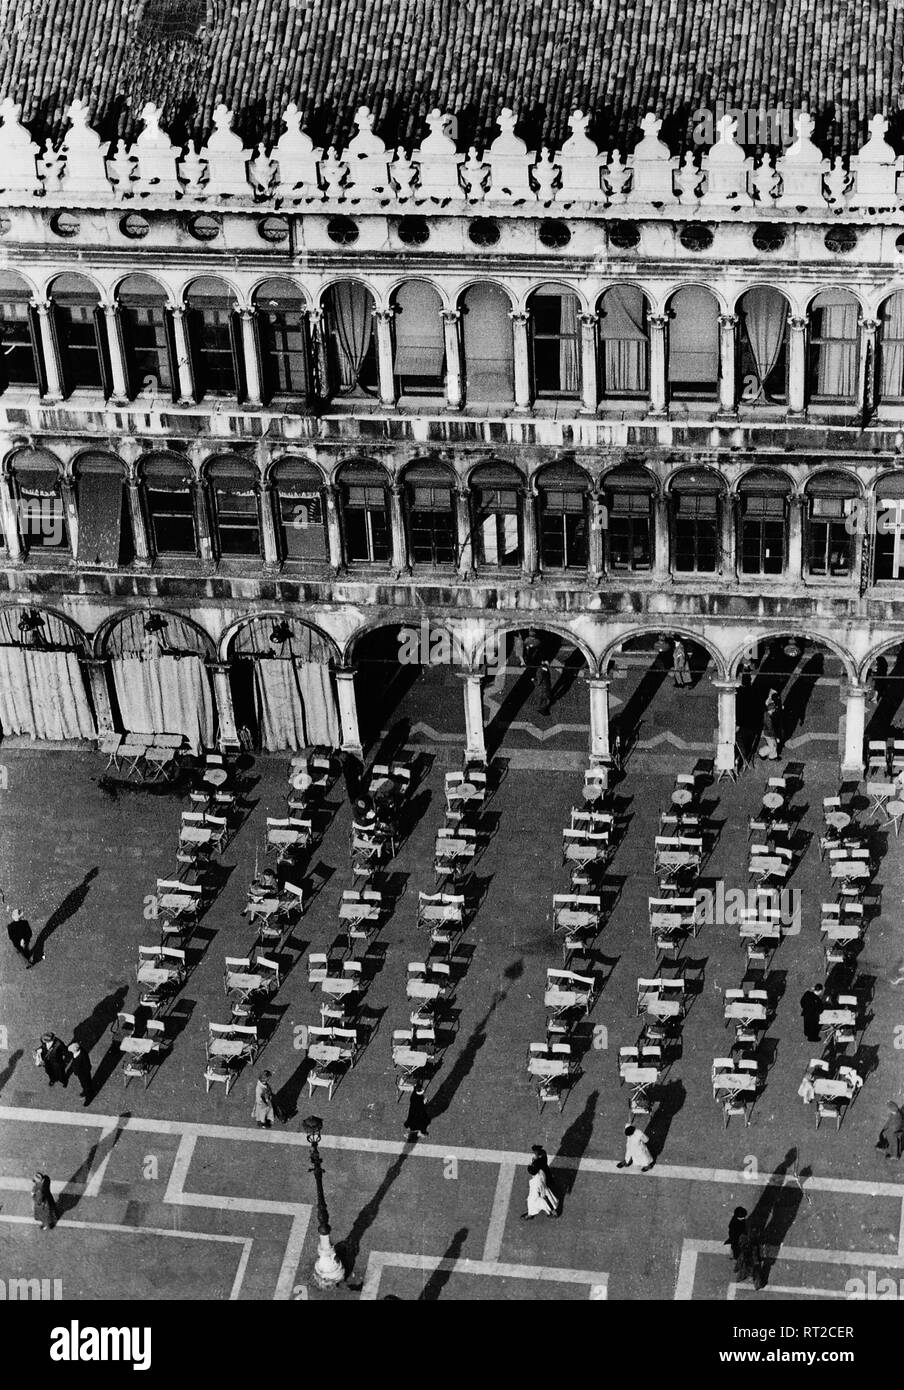 Travel to Venice - Italy in 1950s - view to St Mark's Square - Piazza San Marco in Venice. Image taken in 1954 by Erich Andres Stock Photo